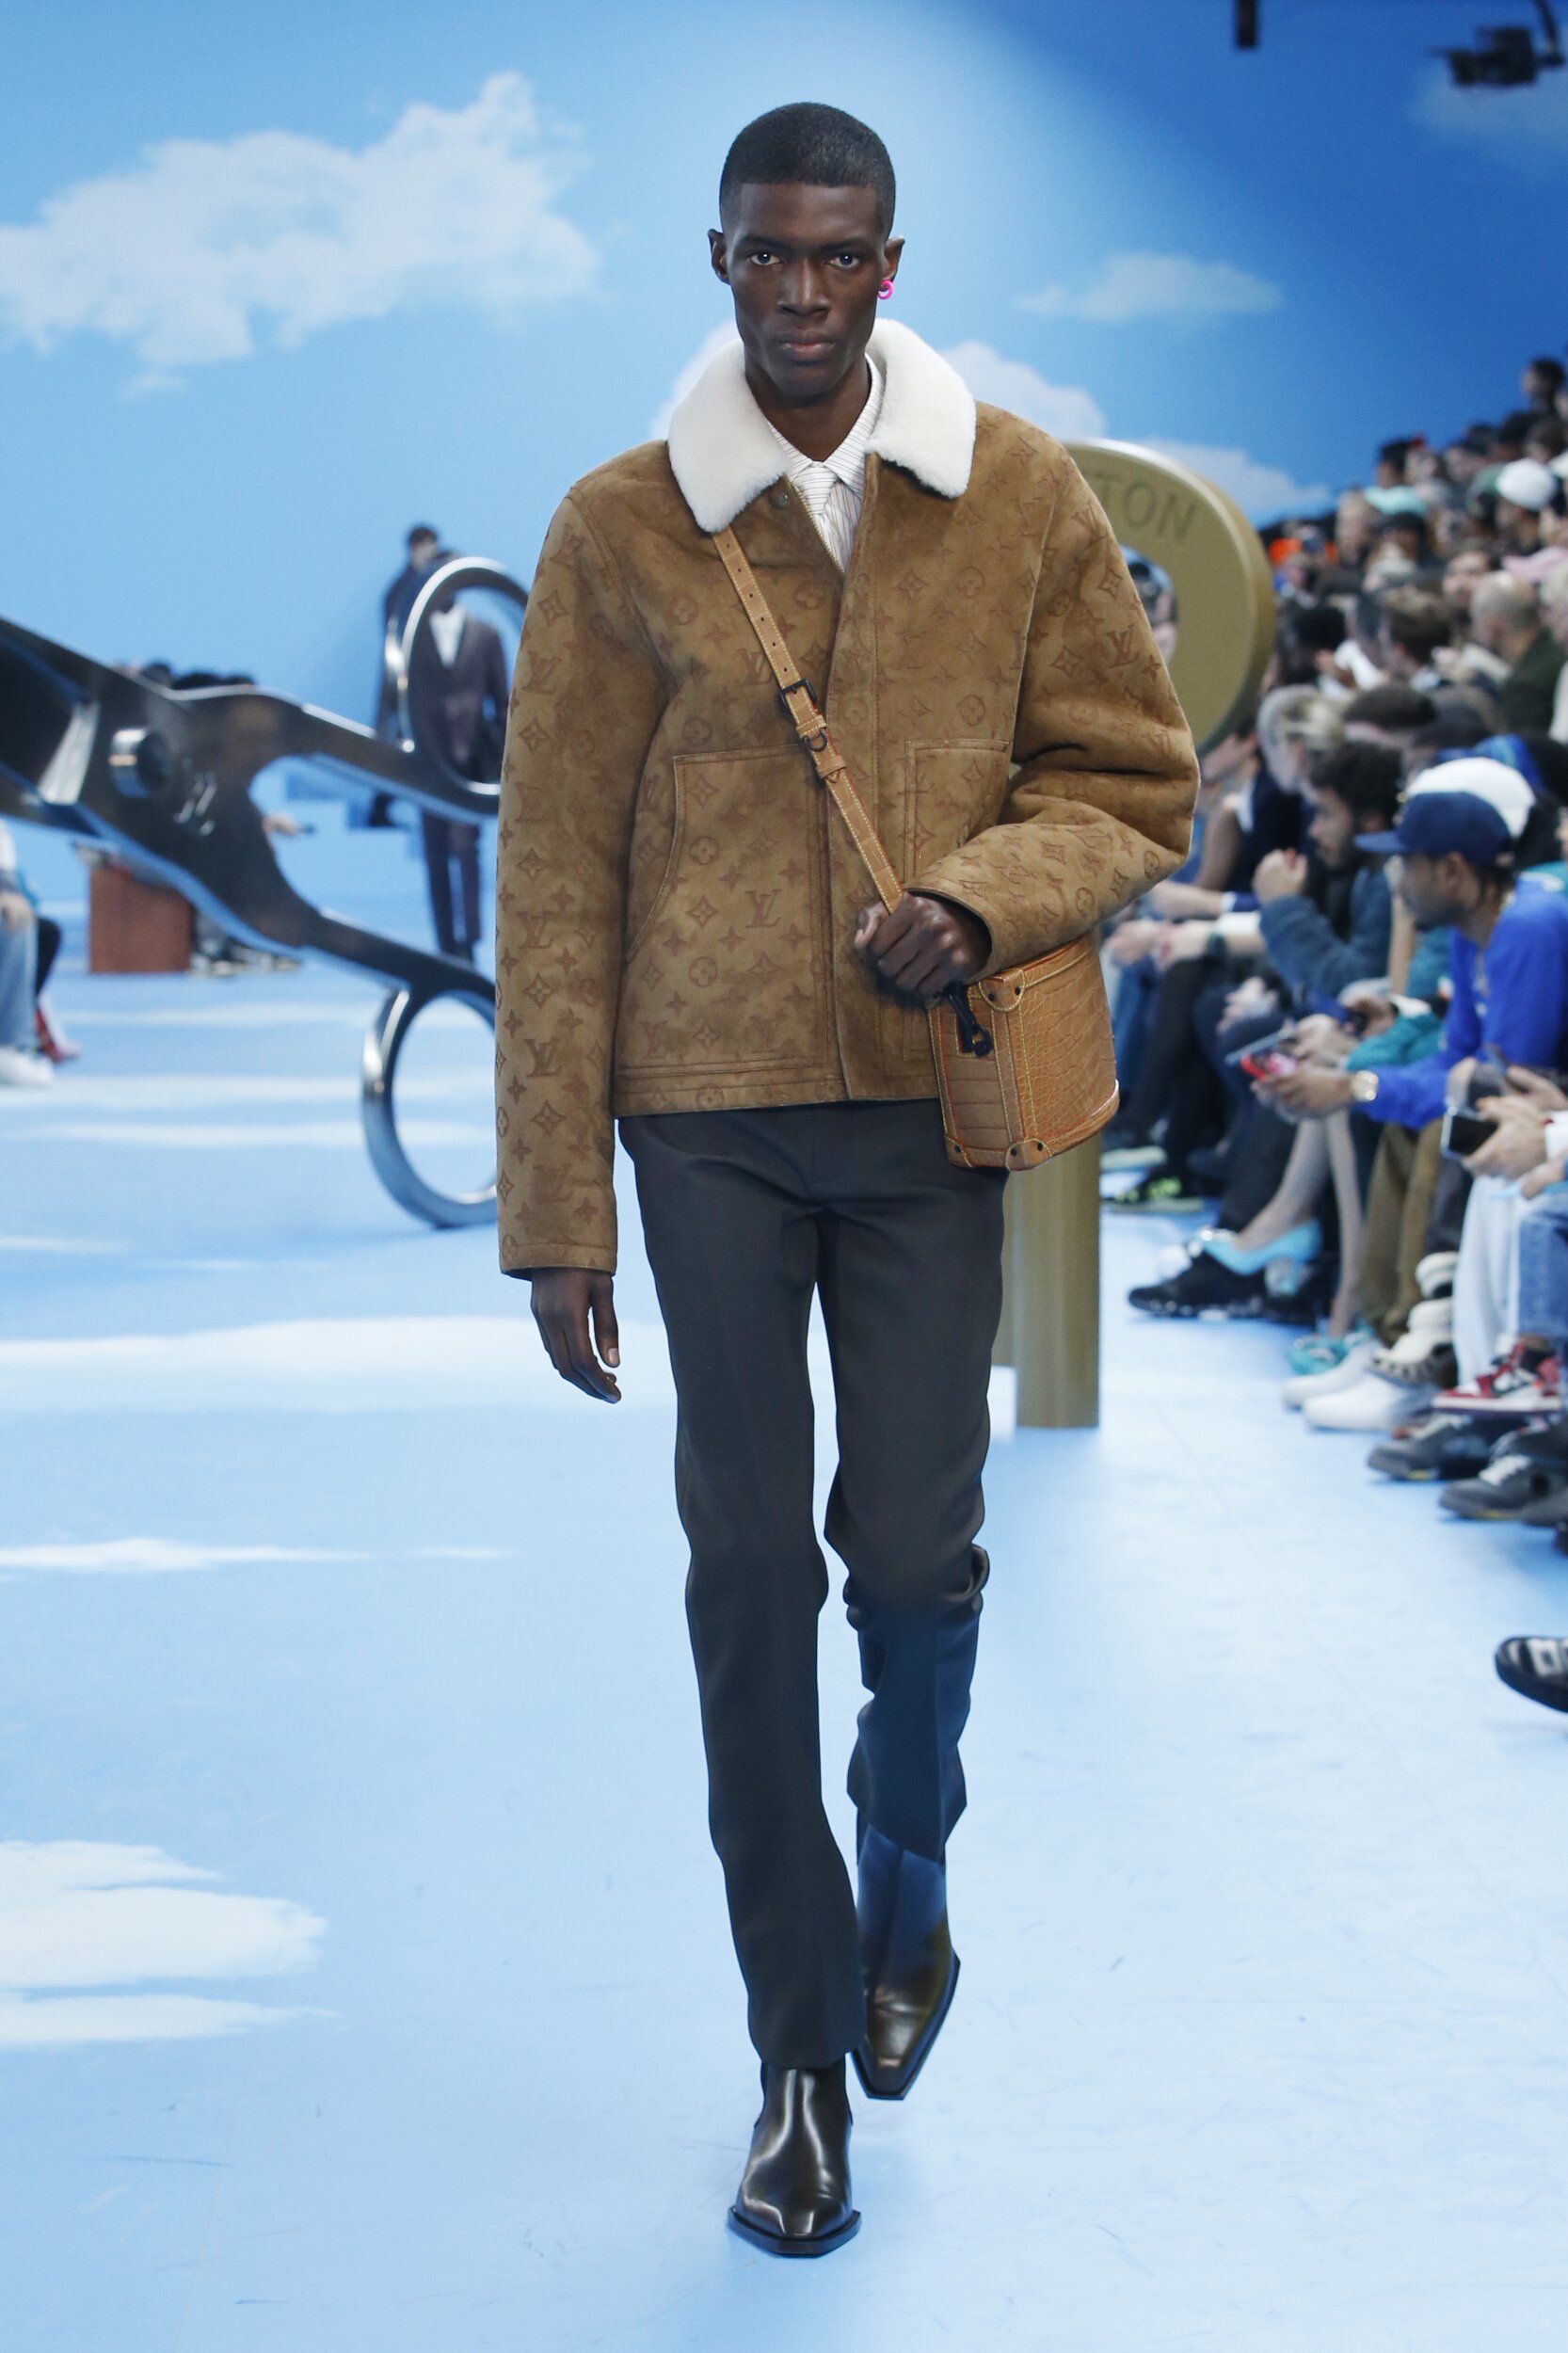 LOUIS VUITTON FALL WINTER 2020 MEN’S COLLECTION | The Skinny Beep